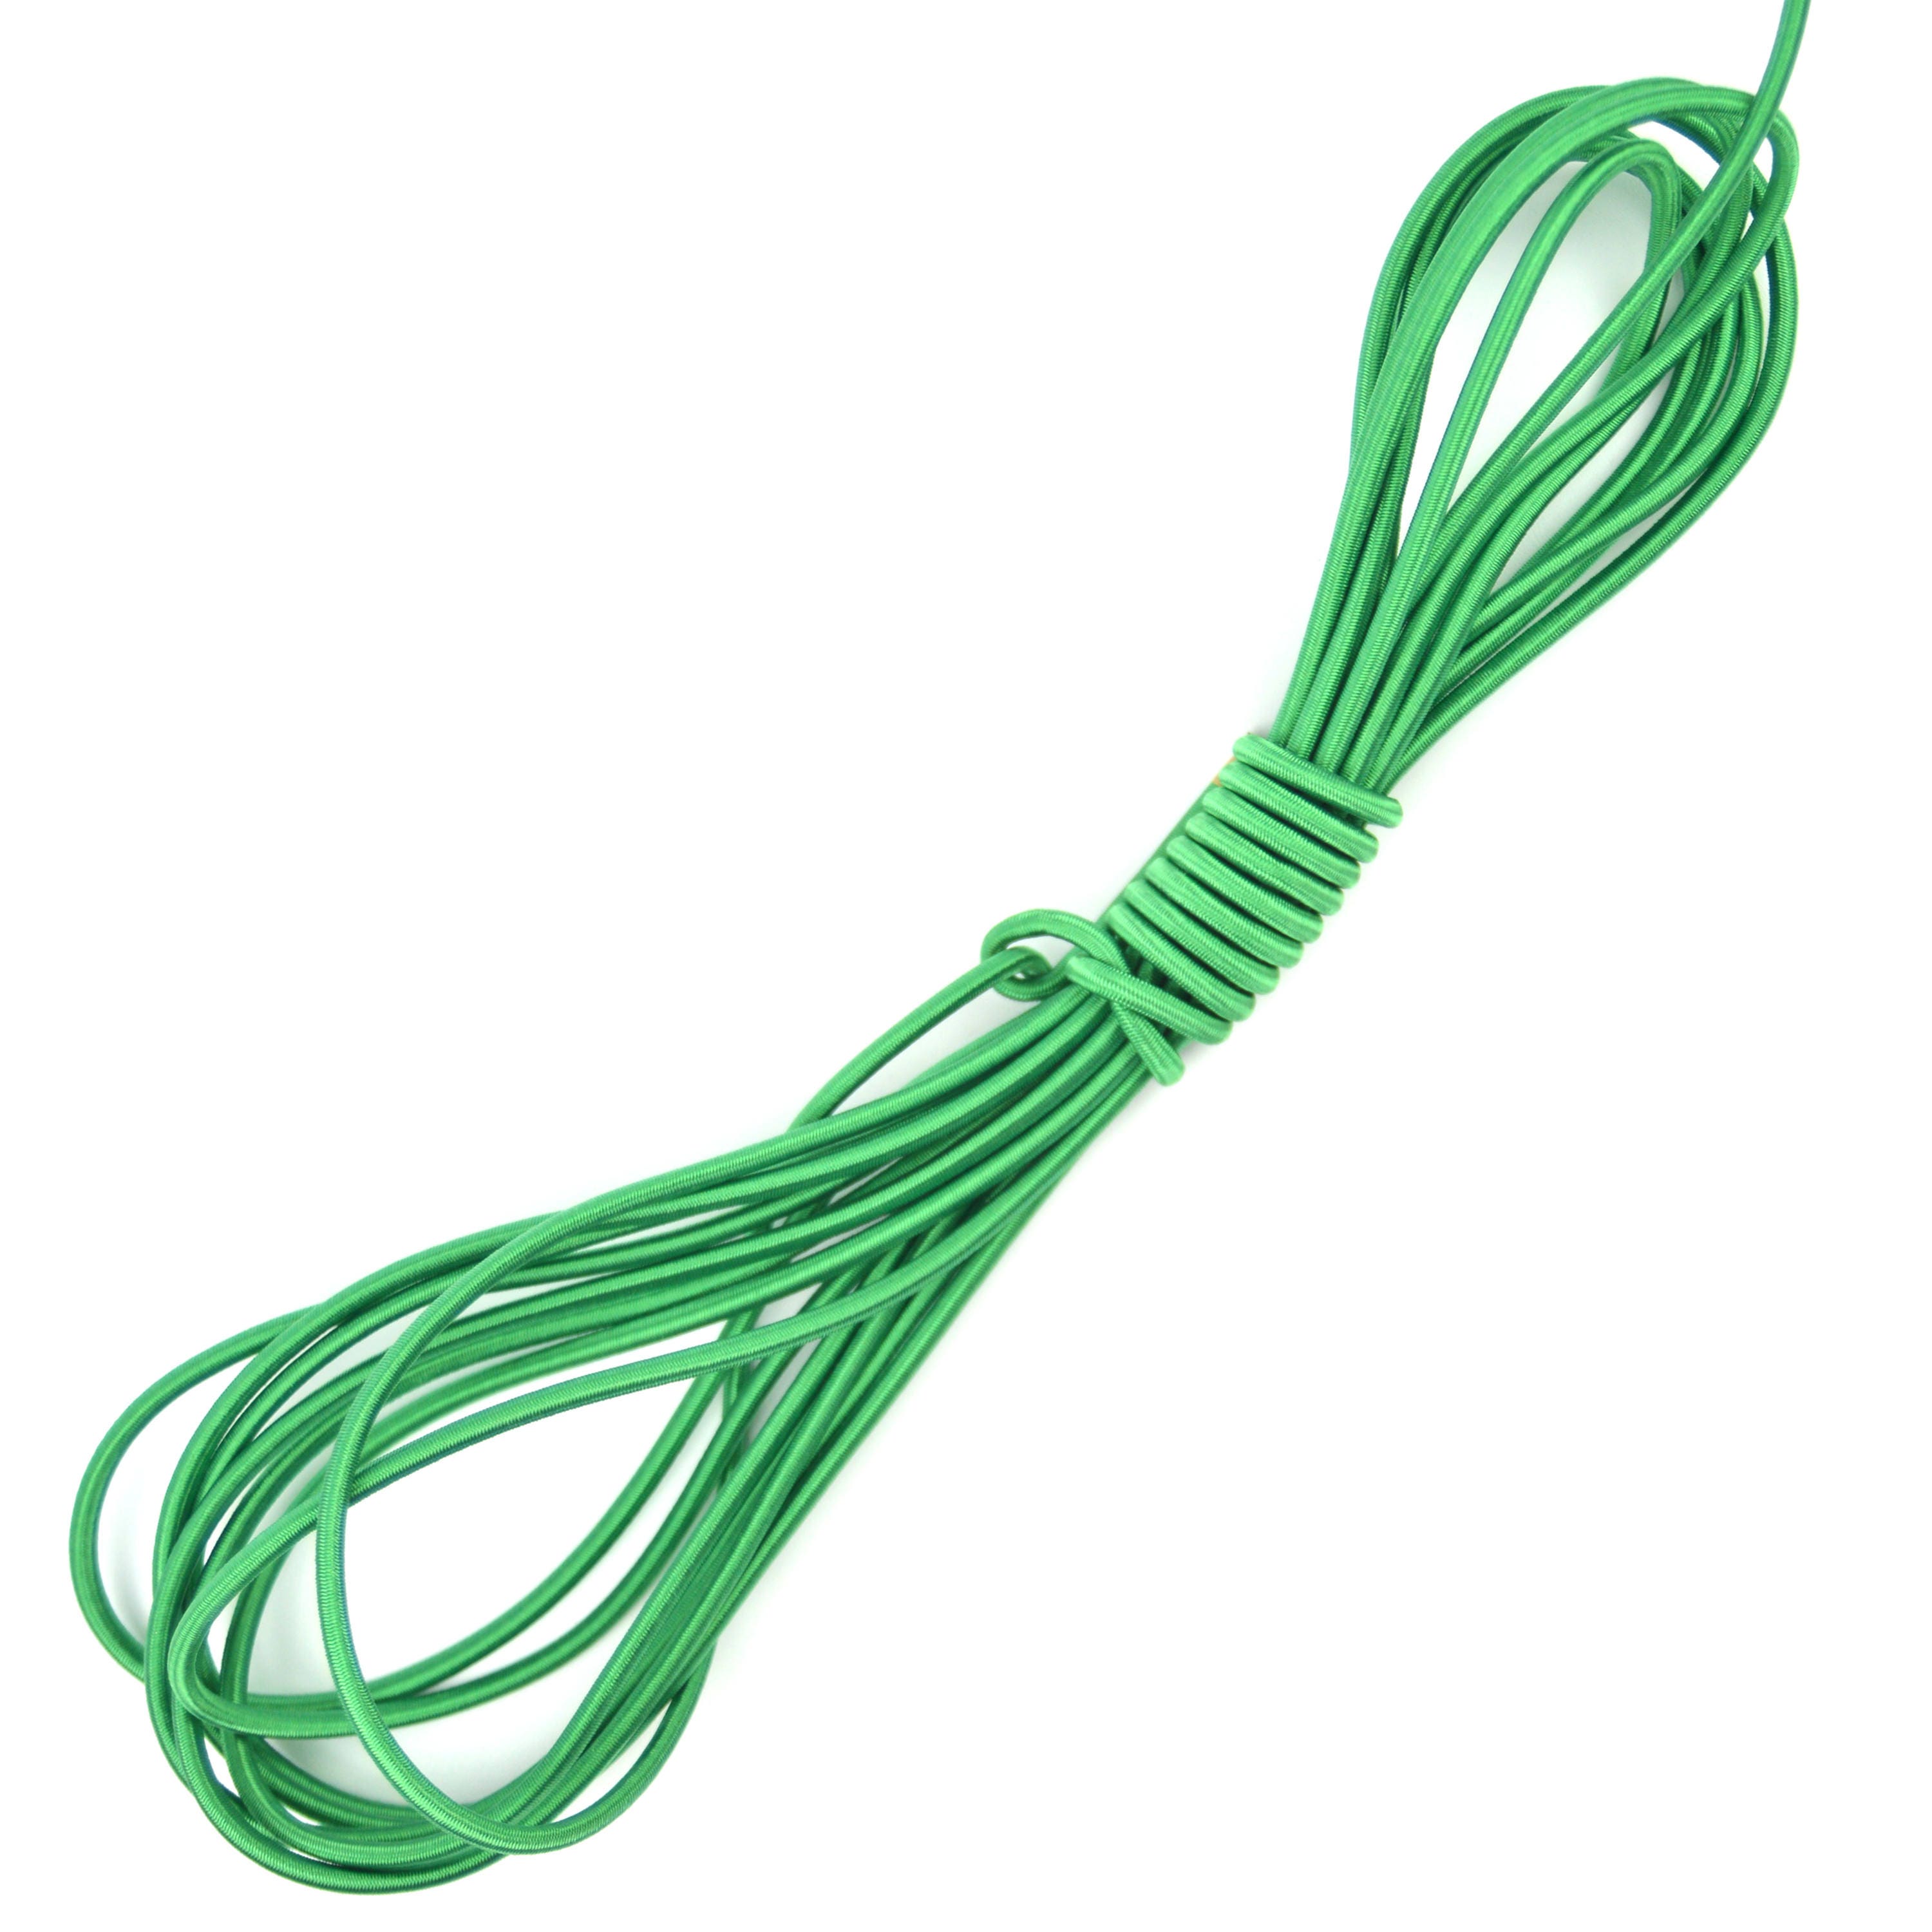 100ft 1/4" Green Shock Cord Marine Grade Bungee Heavy Duty Tie Down Stretch Rope 